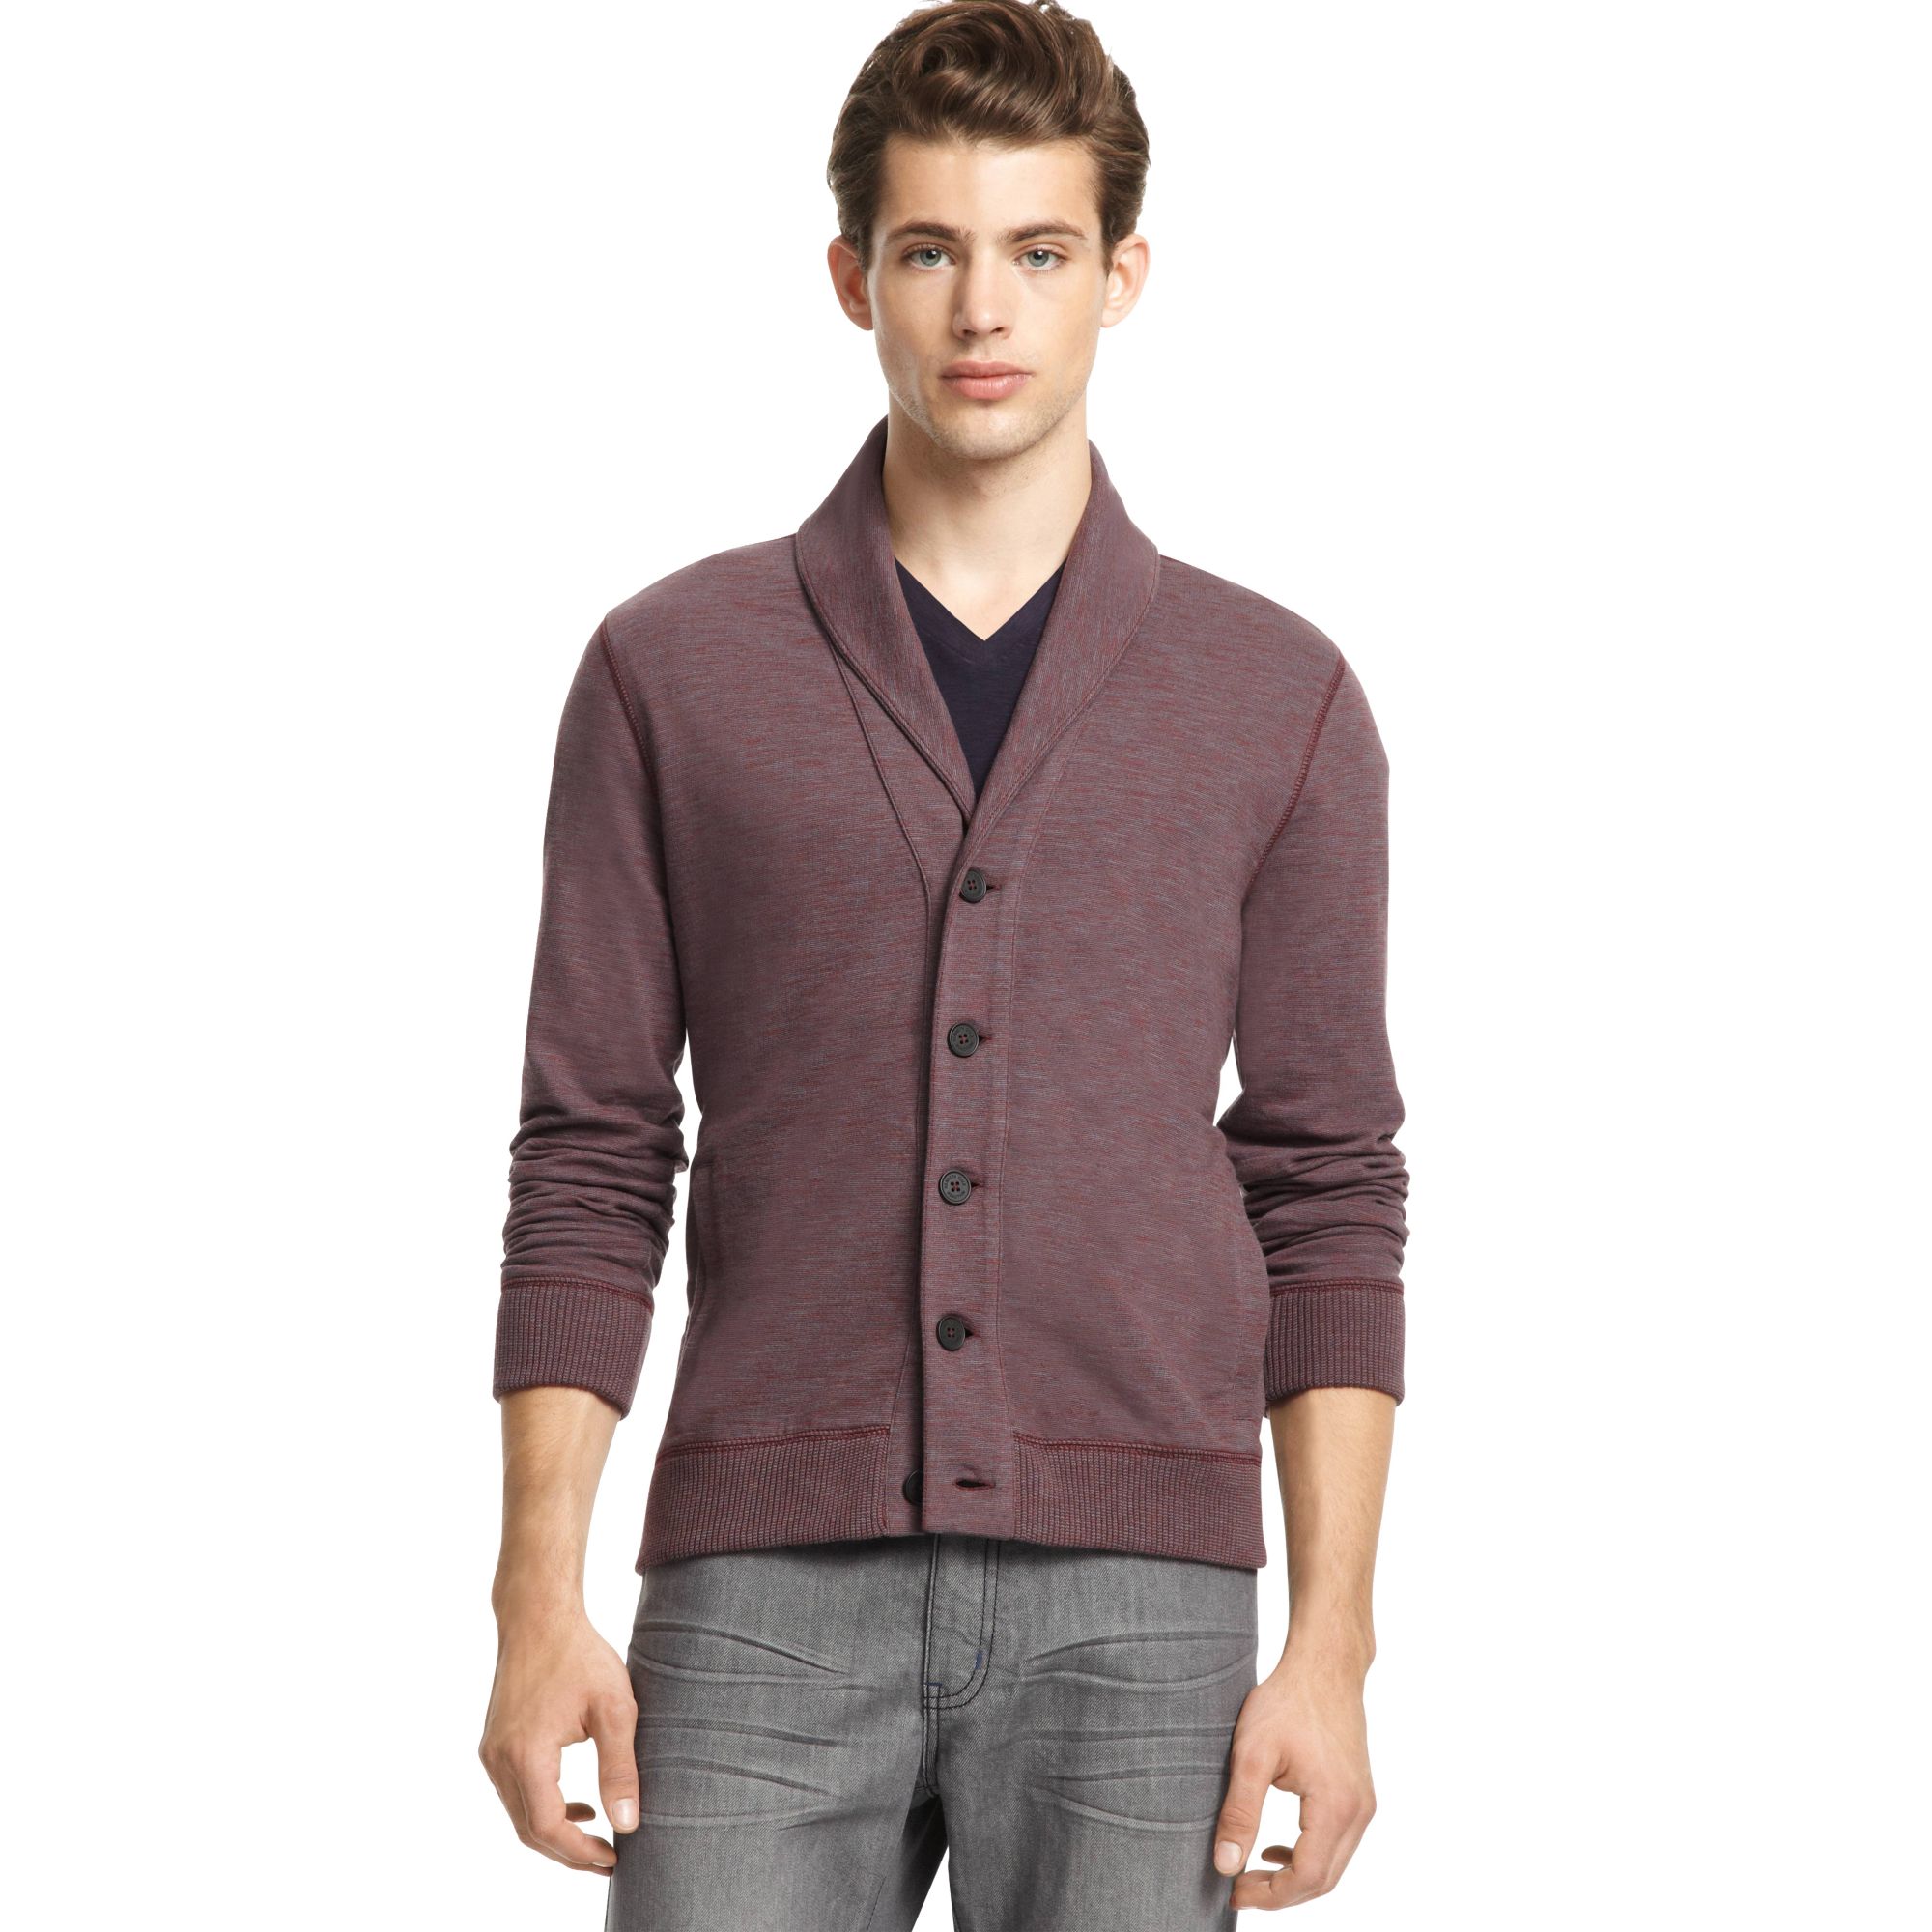 Lyst - Kenneth Cole Reaction Long Sleeve Shawl Cardigan Sweater in ...